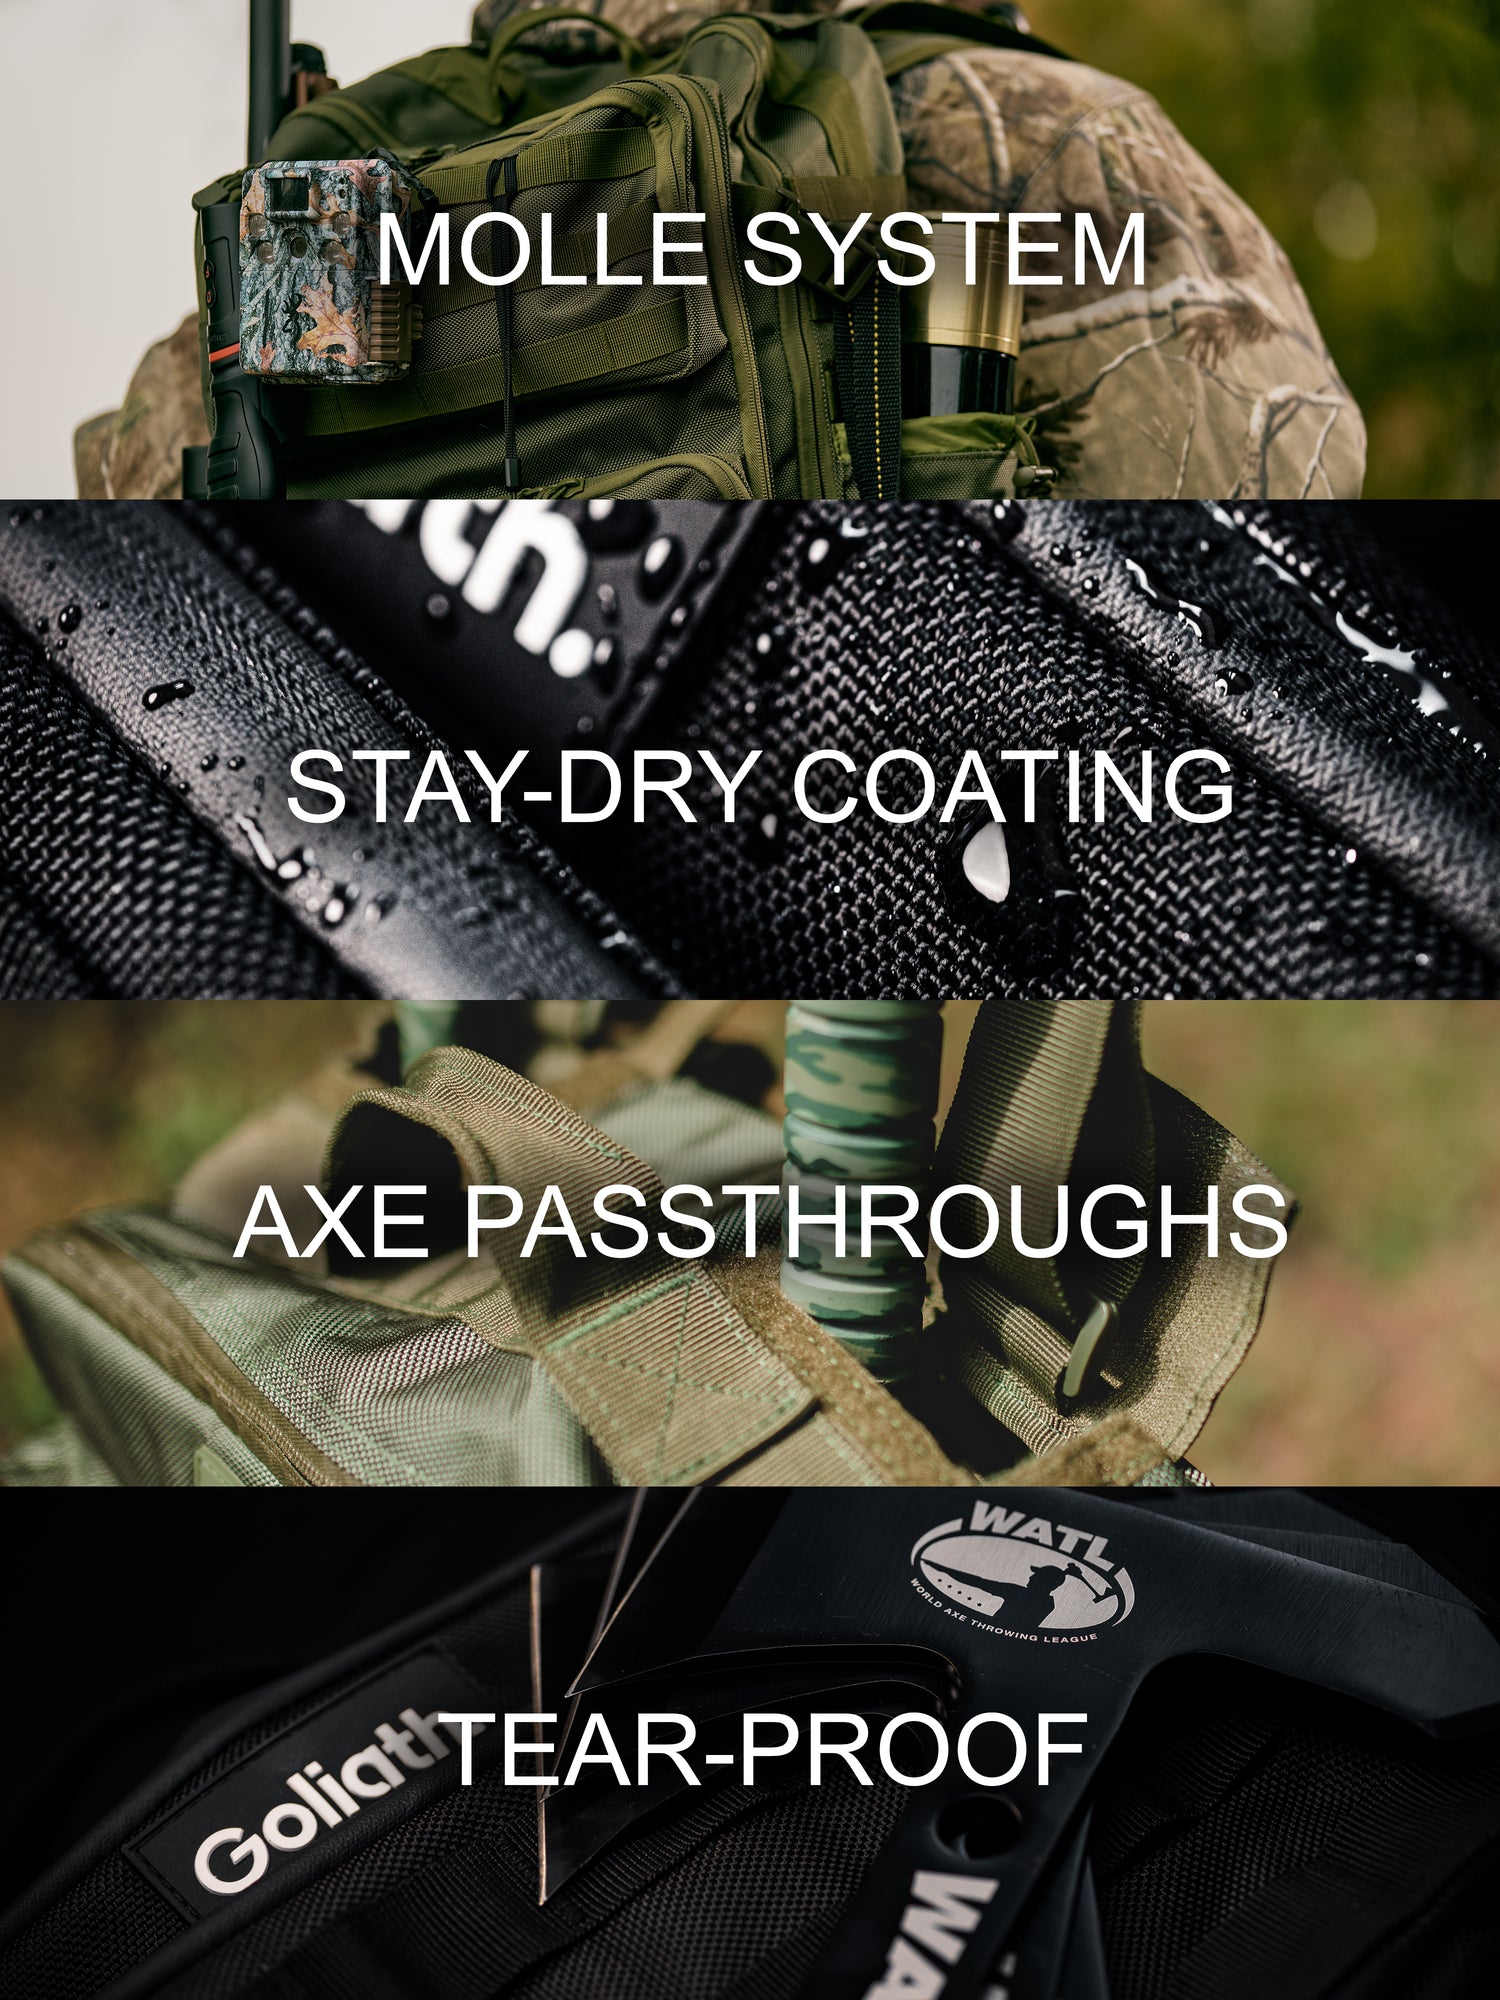 Goliath backpack feature highlights, MOLLE system, stay dry coating, axe passthroughs and tear proof ballistic nylon